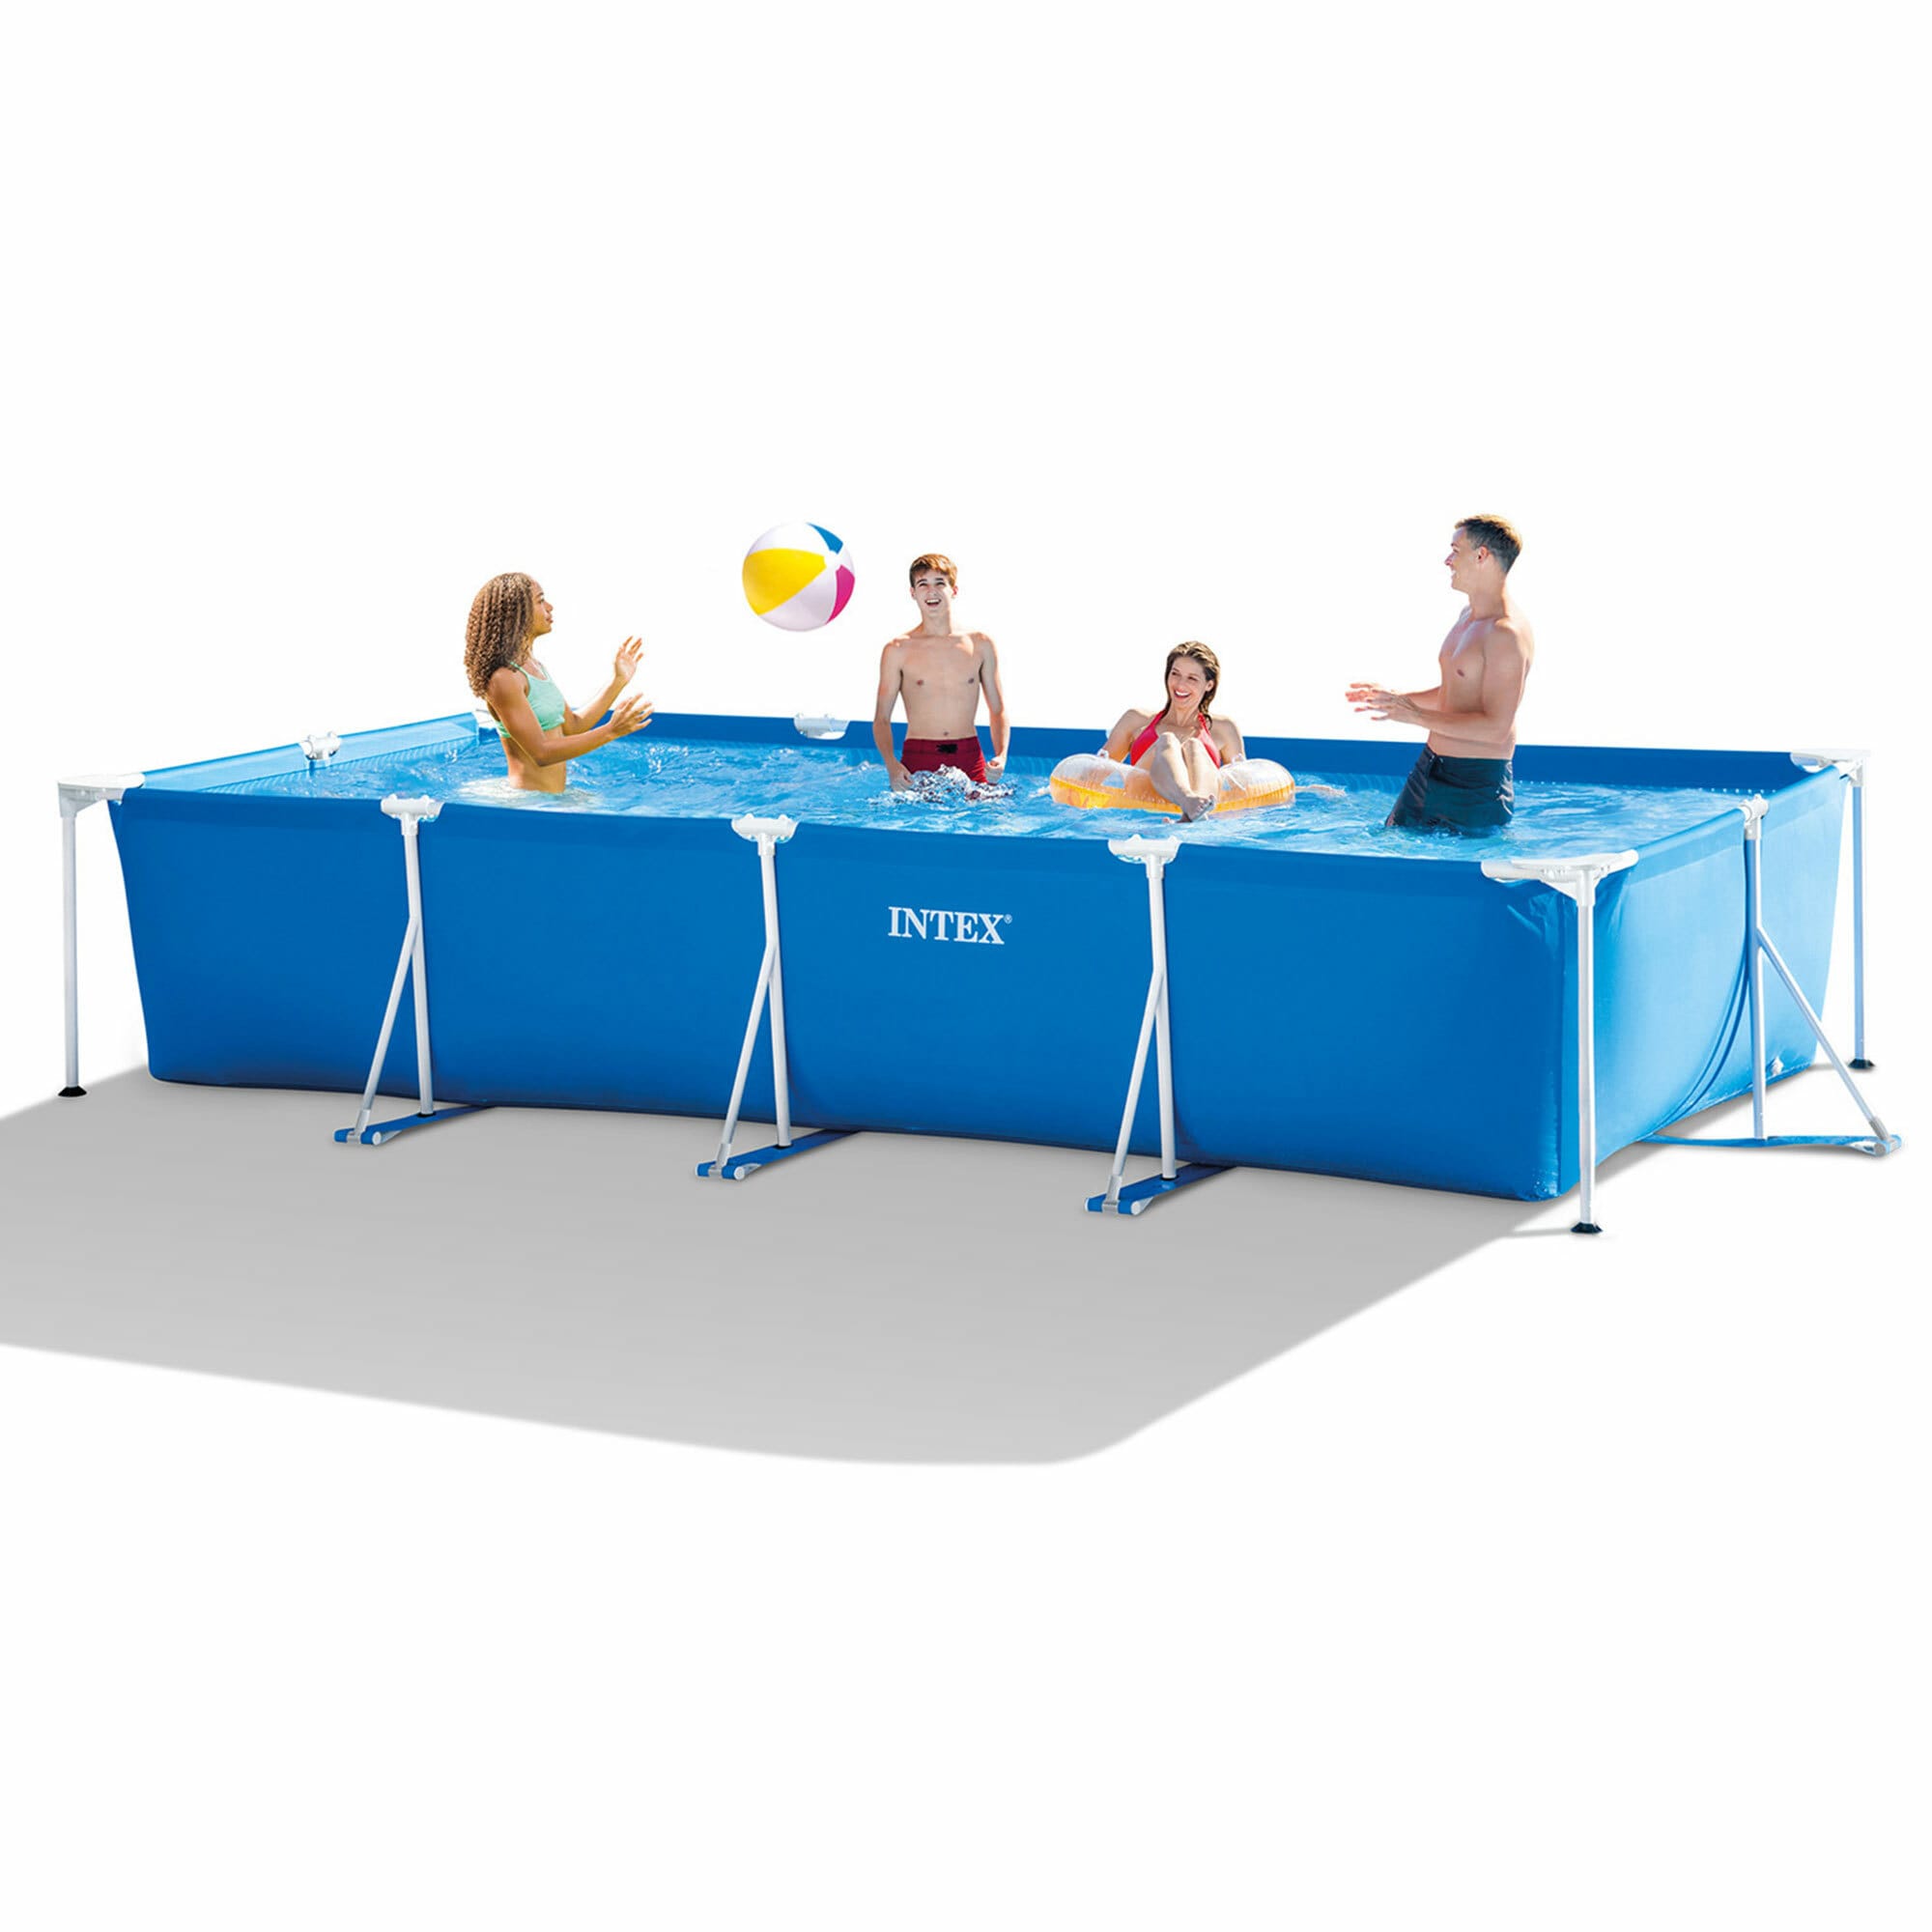 Intex 14.75-ft x 7.3-ft x 33.9-in Metal Frame Rectangle Above-Ground Pool  with Ground Cloth in the Above-Ground Pools department at